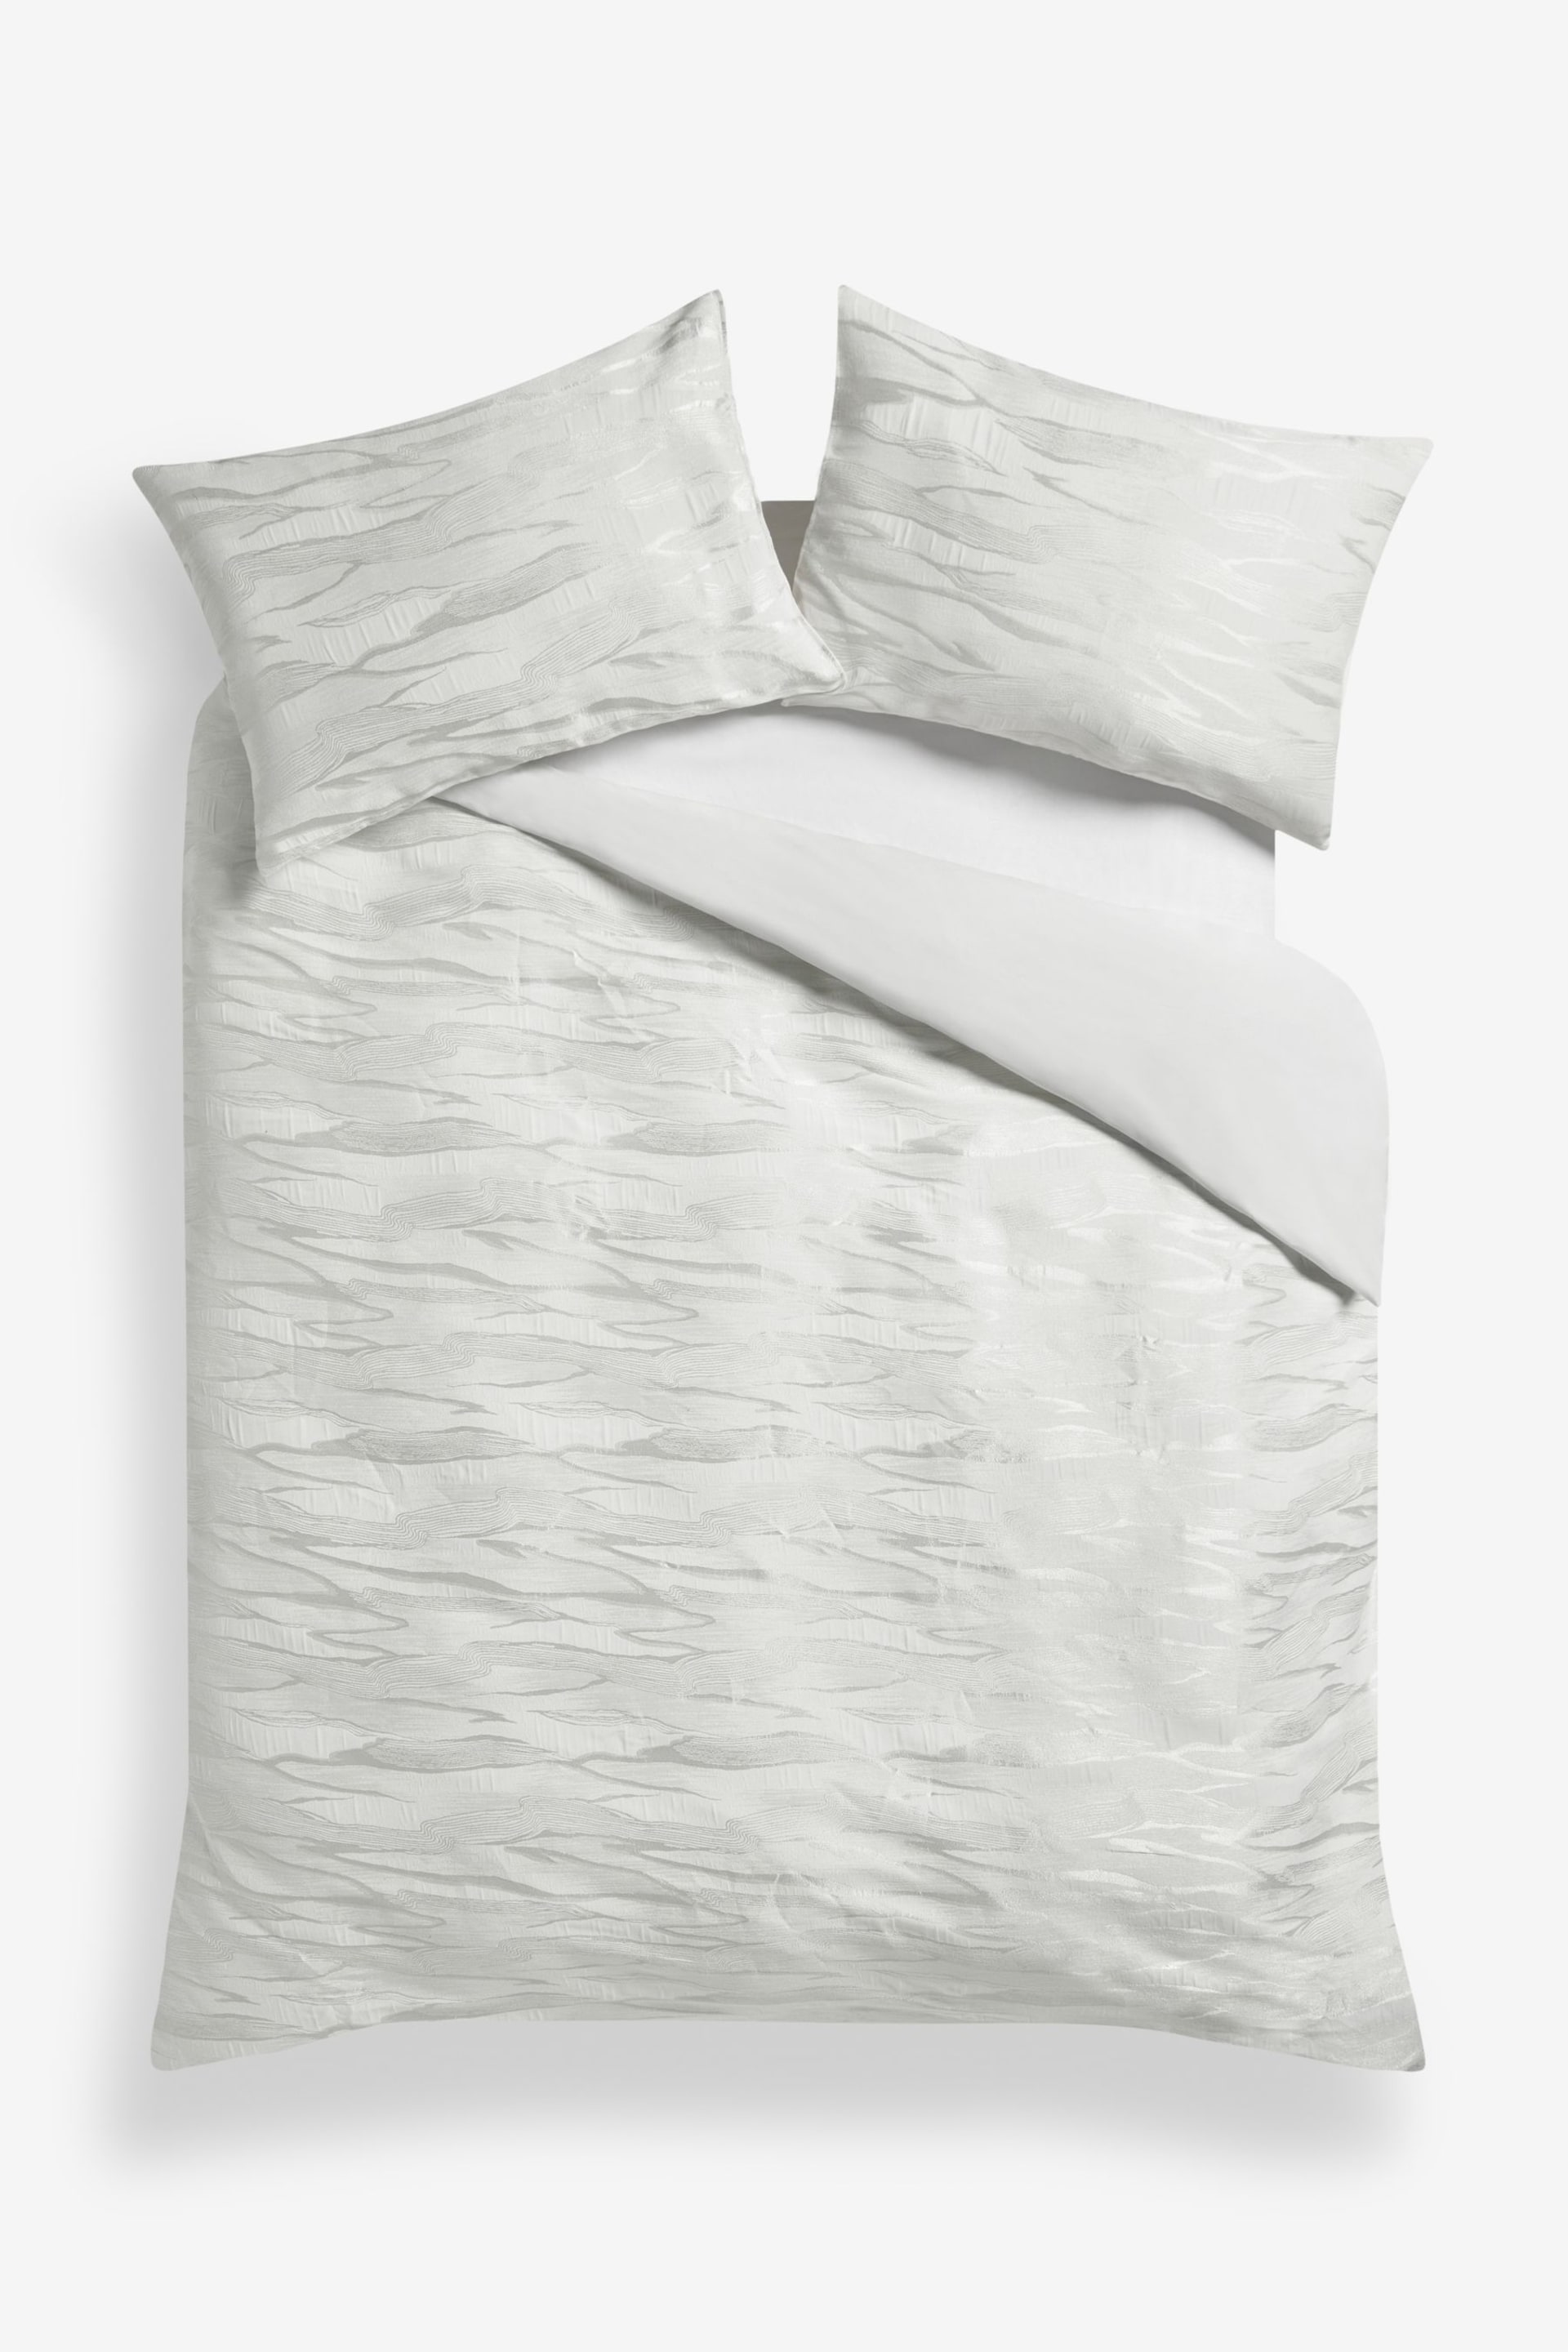 Silver/White Valencia Marble Jacquard Duvet Cover and Pillowcase Set - Image 5 of 6